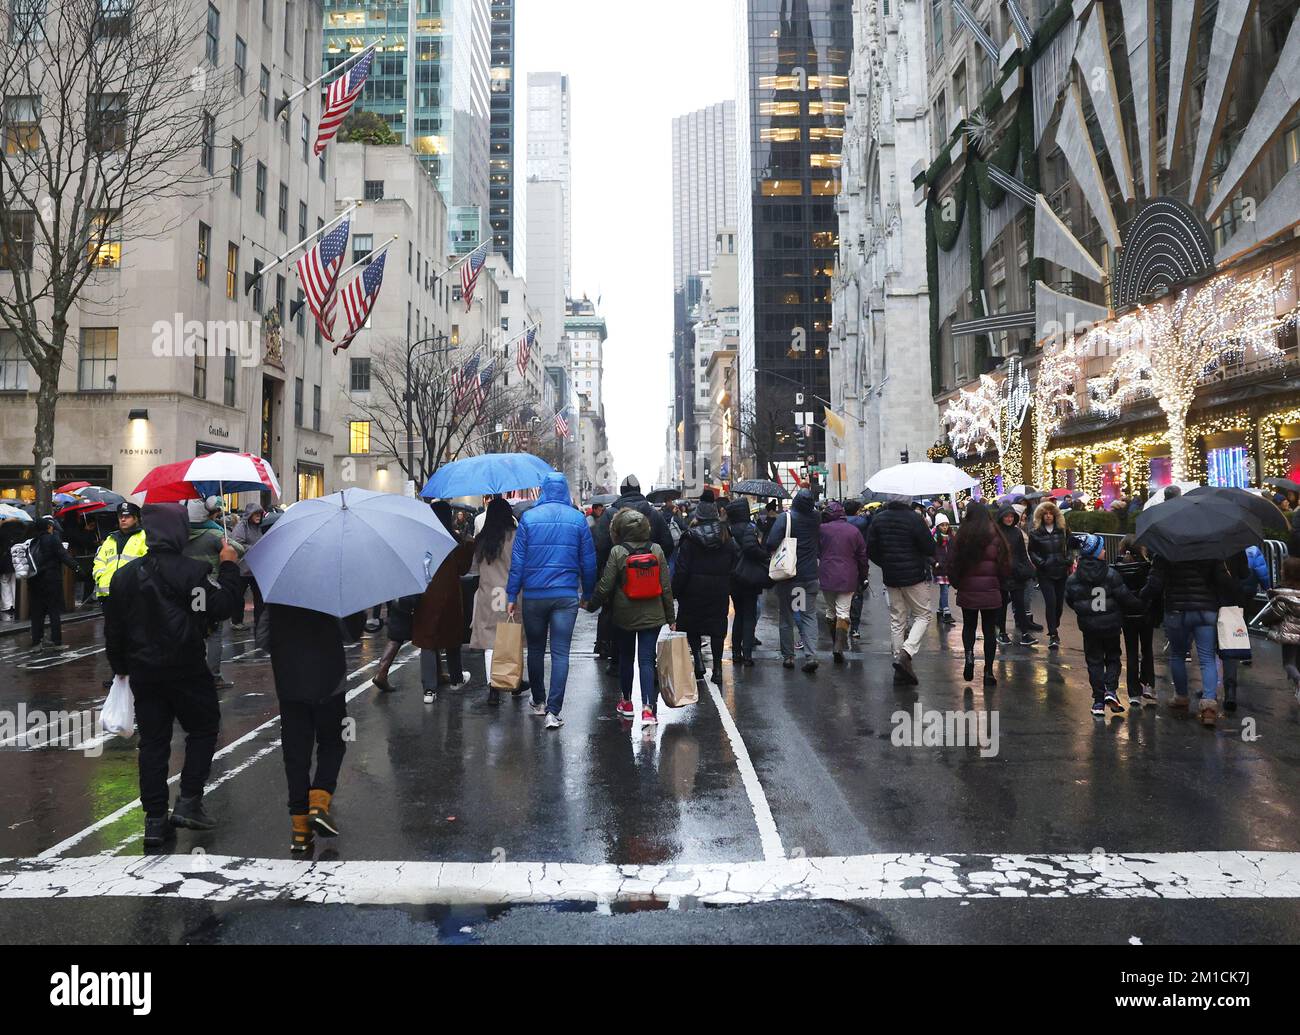 New York, United States. 11th Dec, 2022. Pedestrians and shoppers walk on Fifth Avenue which is closed to automobile traffic by the NYPD on Sunday, December 11, 2022 in New York City. Eleven blocks of Fifth Avenue are closed off to traffic and opened only for pedestrians on December 4th, 11th and 18th from noon to 6 p.m. This is the first time that stretch of Fifth Avenue is turned into a pedestrians only in roughly 50 years. Photo by John Angelillo/UPI Credit: UPI/Alamy Live News Stock Photo